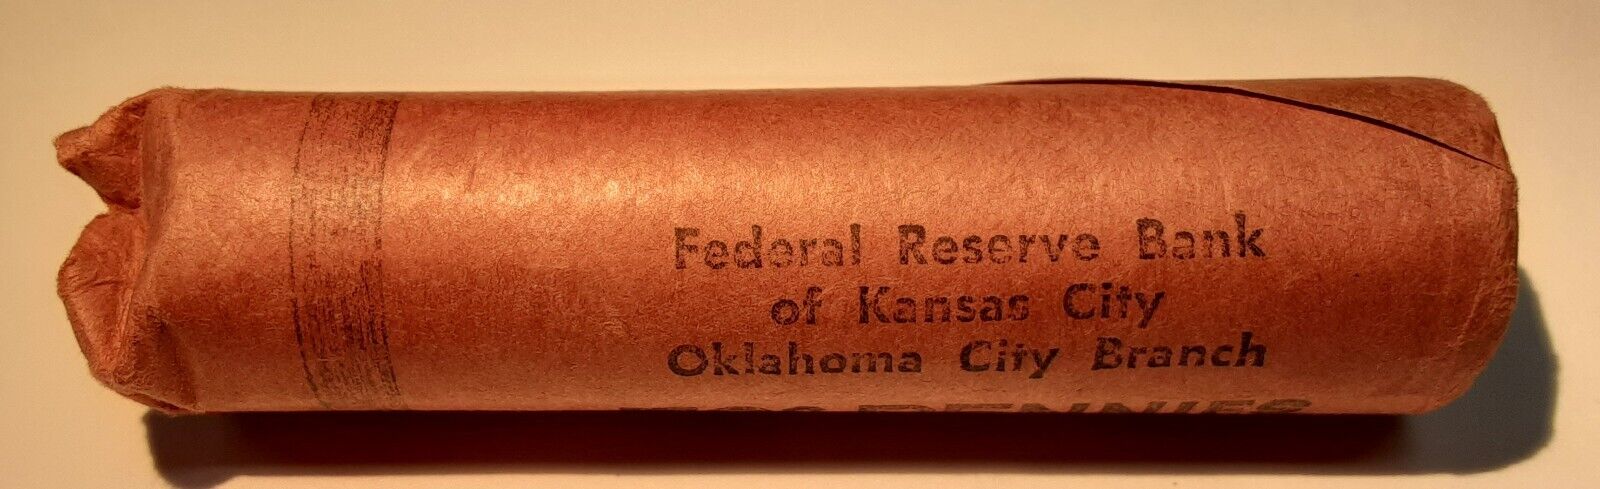 1957-D Lincoln Cent Roll of 50 BU Coins in Original OKC/KC FRB Wrapper